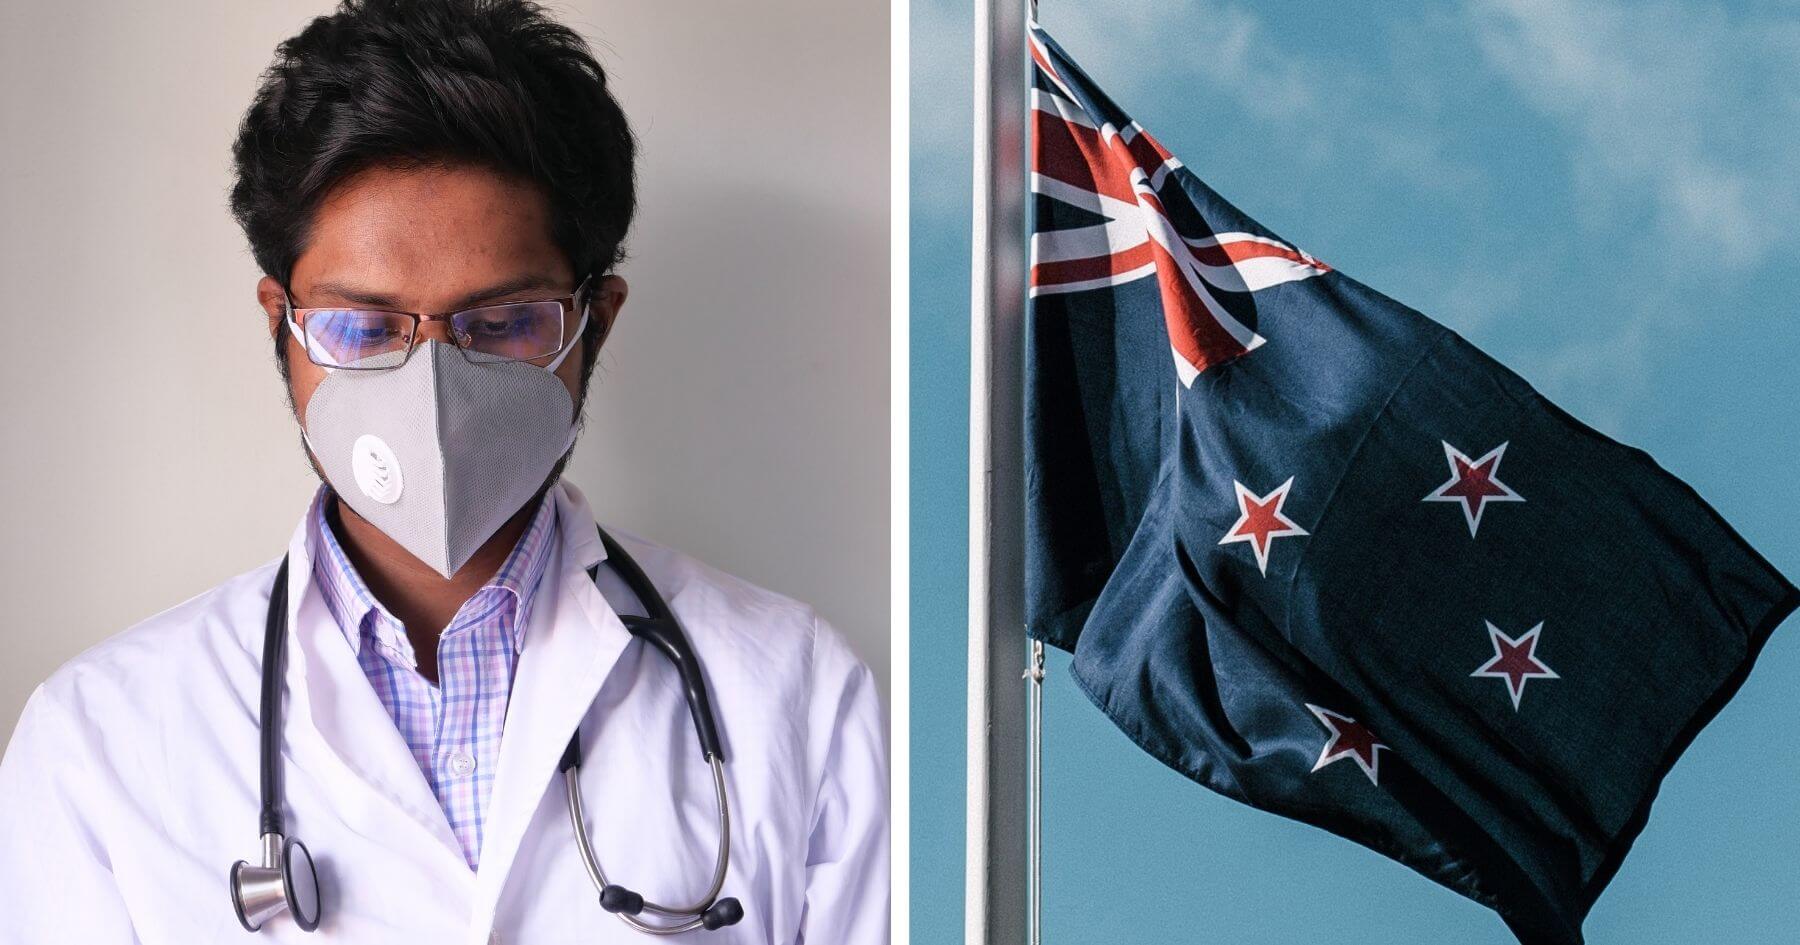 New Zealand Only 10% of health workers “definitely willing” to perform euthanasia